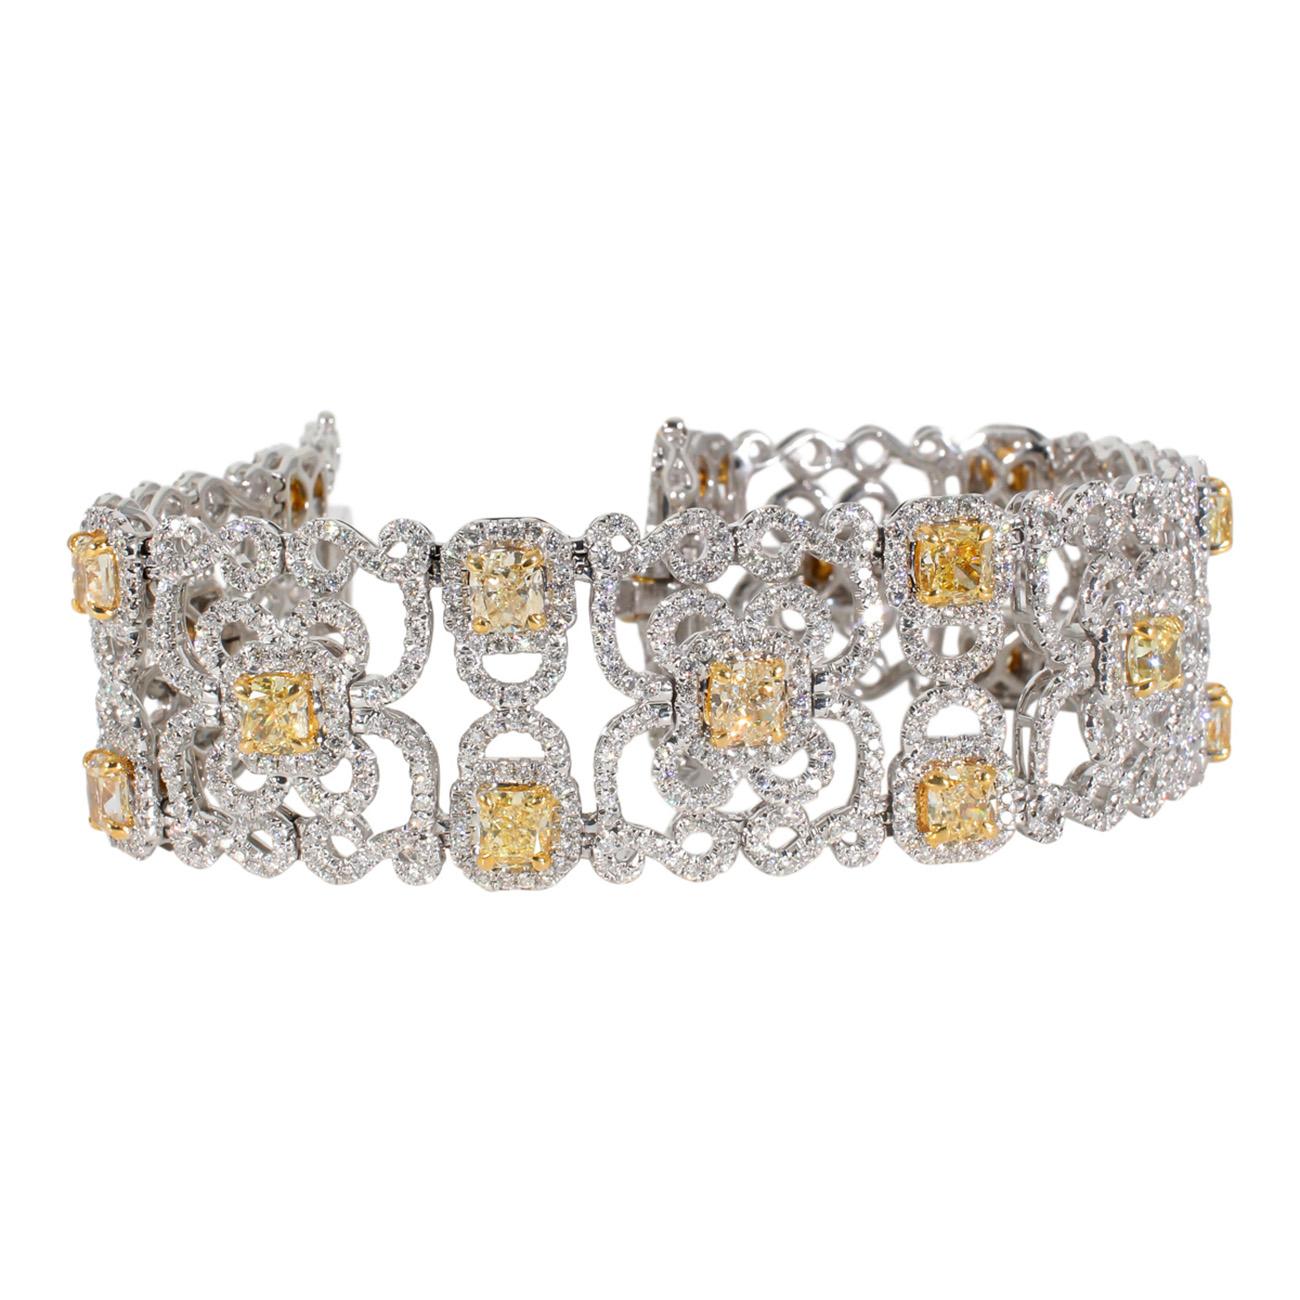 Designer bracelet in 18K white gold with French pave set rounds around prong set fancy yellow cushion cut diamonds.  D17.73ct.t.w.